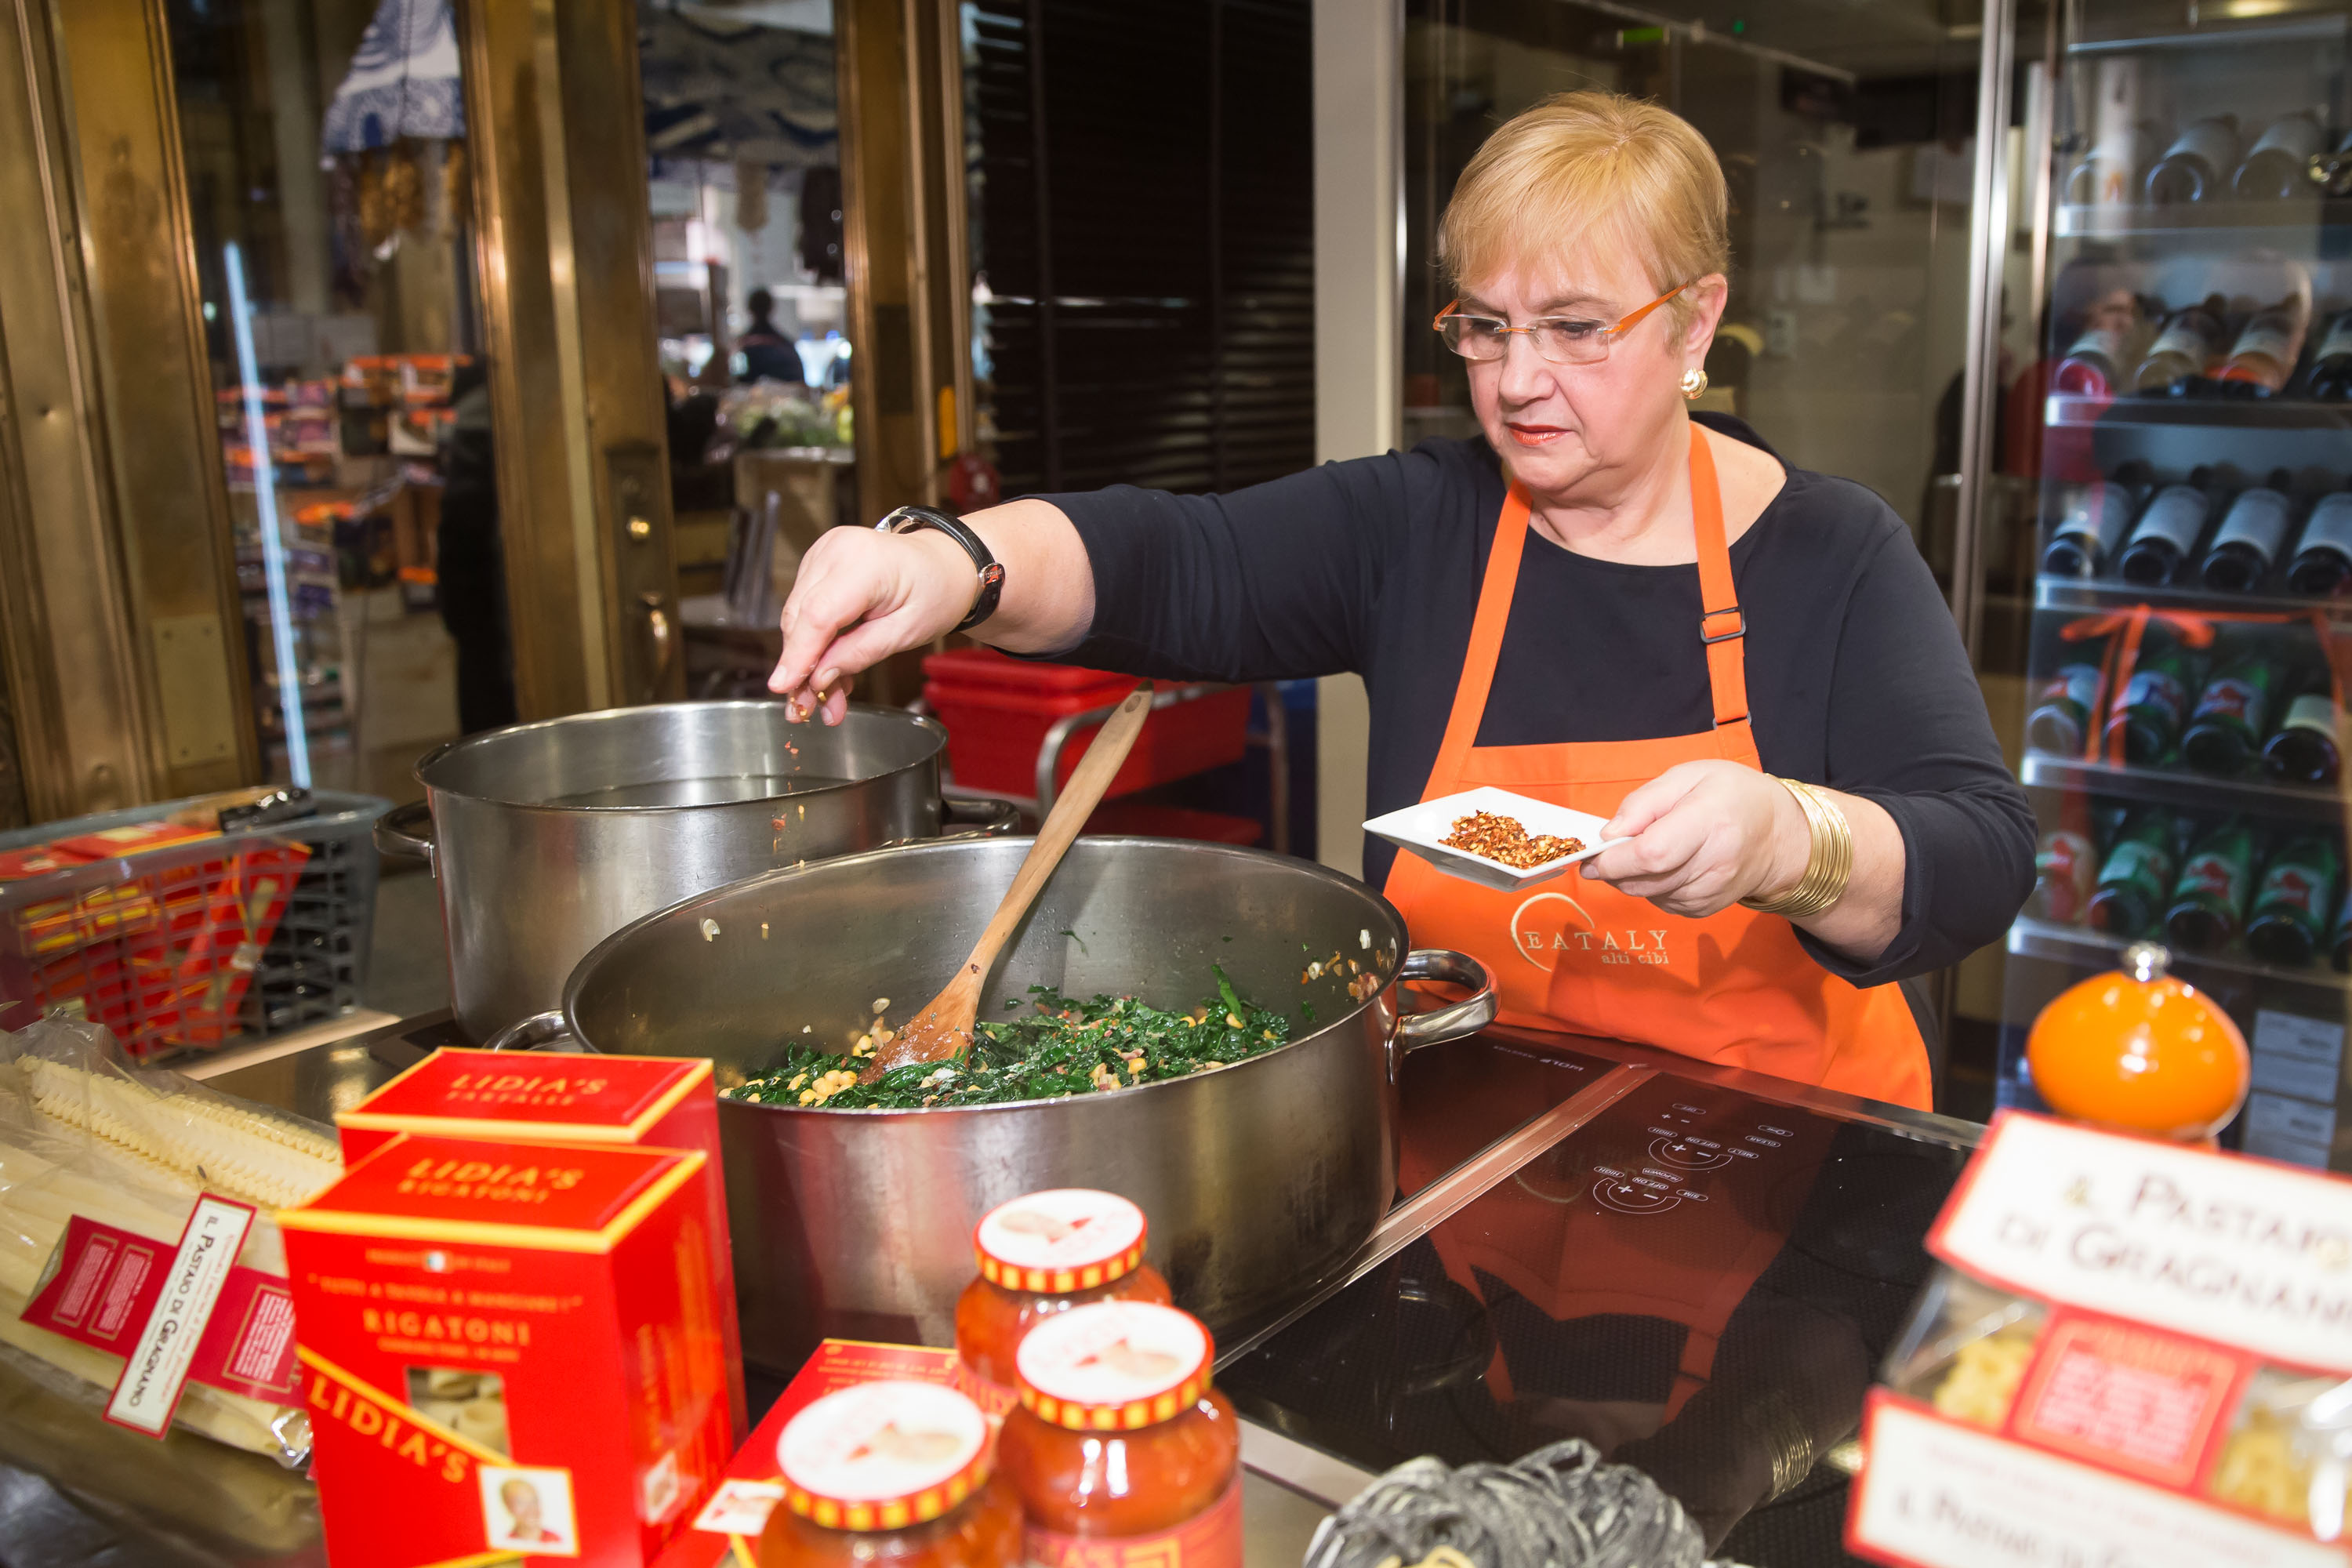 Celebrity chef Lidia Bastianich wears an orange apron as she prepares a dish in this photograph.